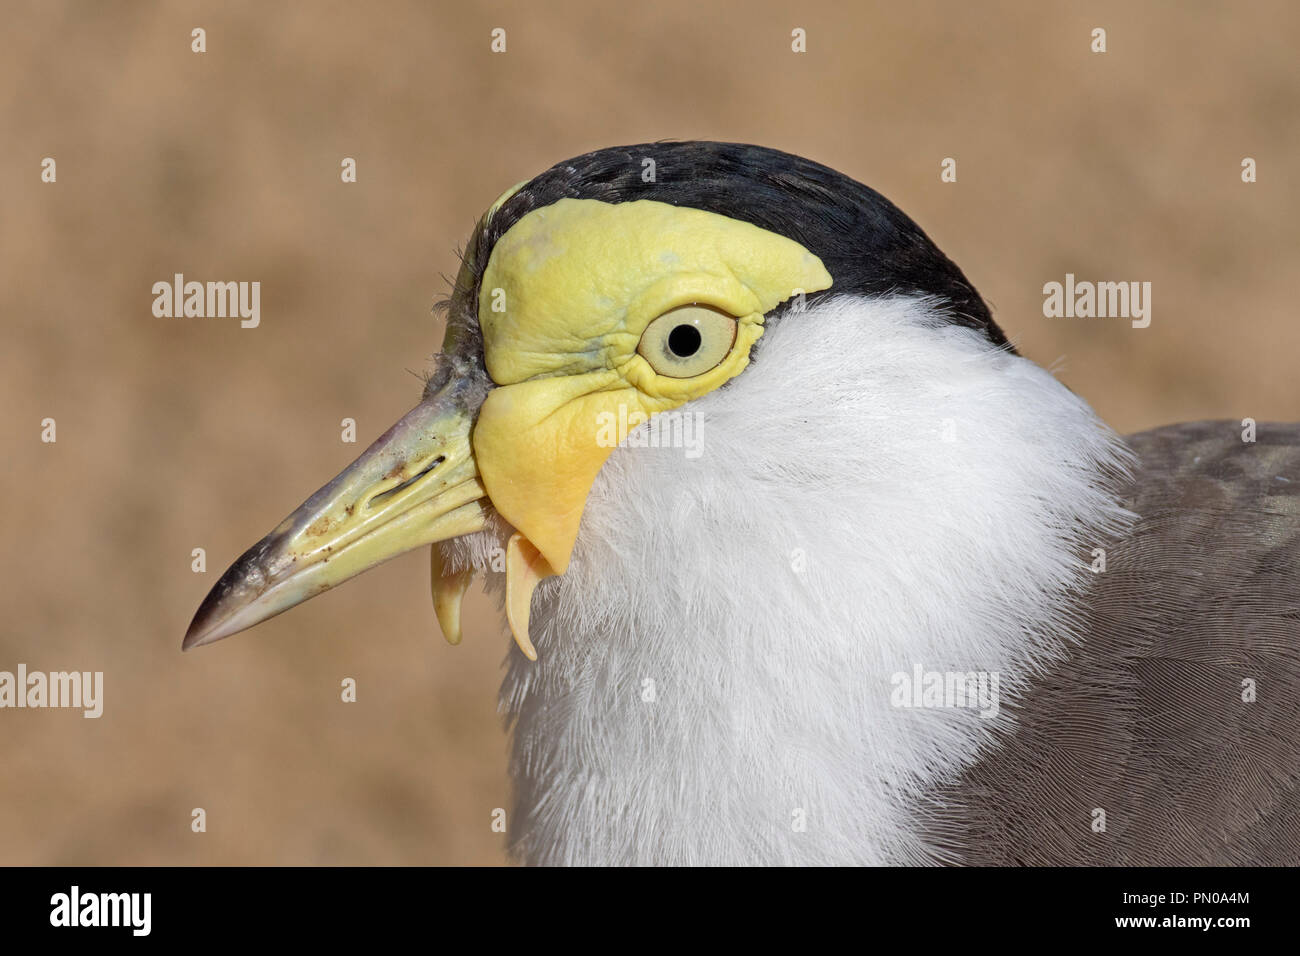 Masked Lapwing or Wattled Plover   (Vanellus miles) Stock Photo